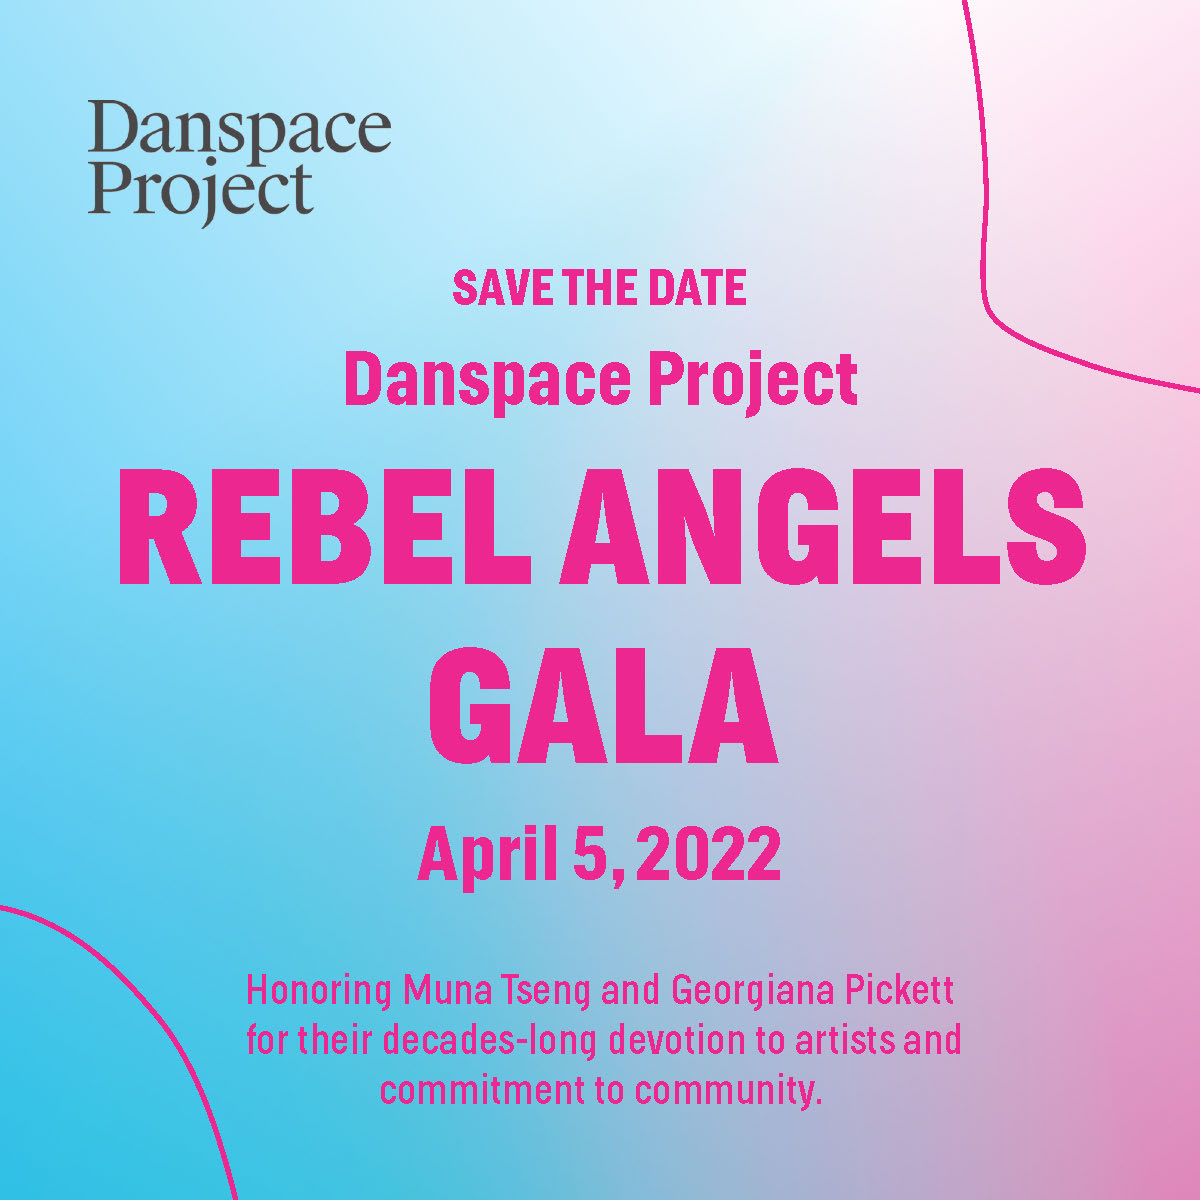 Over a gradient of bright blue to bright pink, “Save the date Danspace Project Rebel Angels Gala April 5, 2022 Honoring Muna Tseng and Georgiana Pickett for their decades-long devotion to artists and commitment to community” is written down the center in thick neon pink font. 2 thin neon pink lines curve in opposing corners of the square graphic.